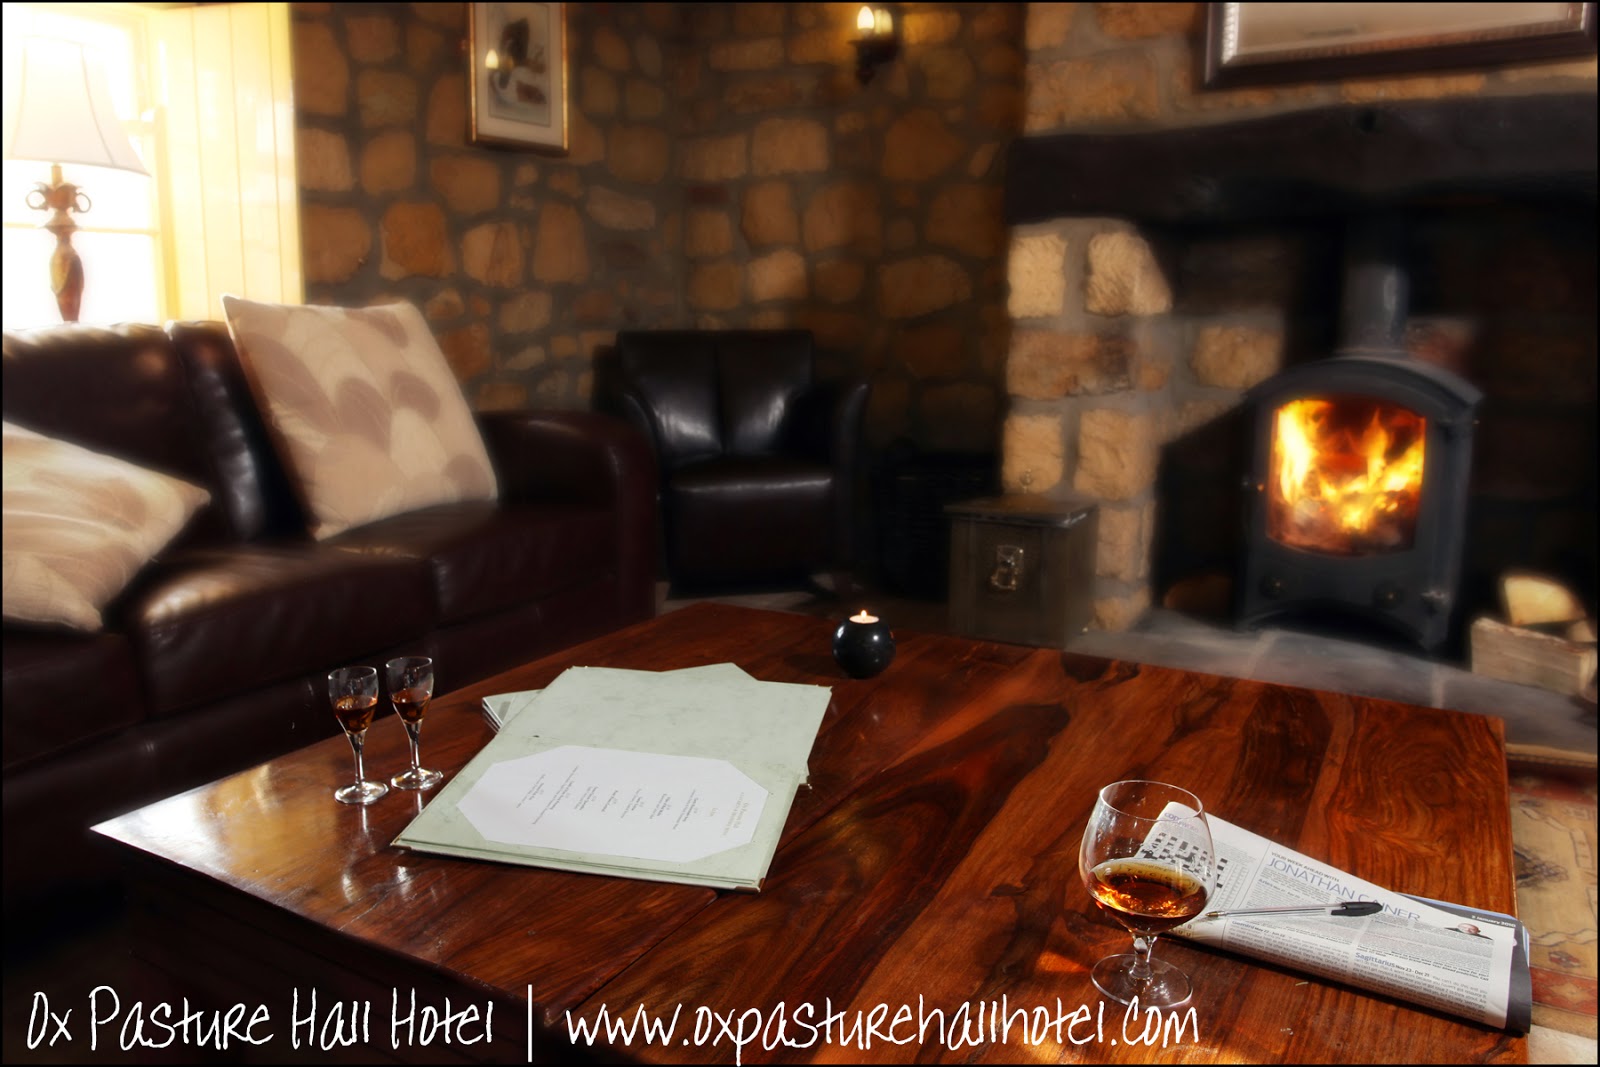 Allow your guests to relax in the cozy lodges at Ox Pasture Hall Hotel | Anyonita-nibbles.co.uk